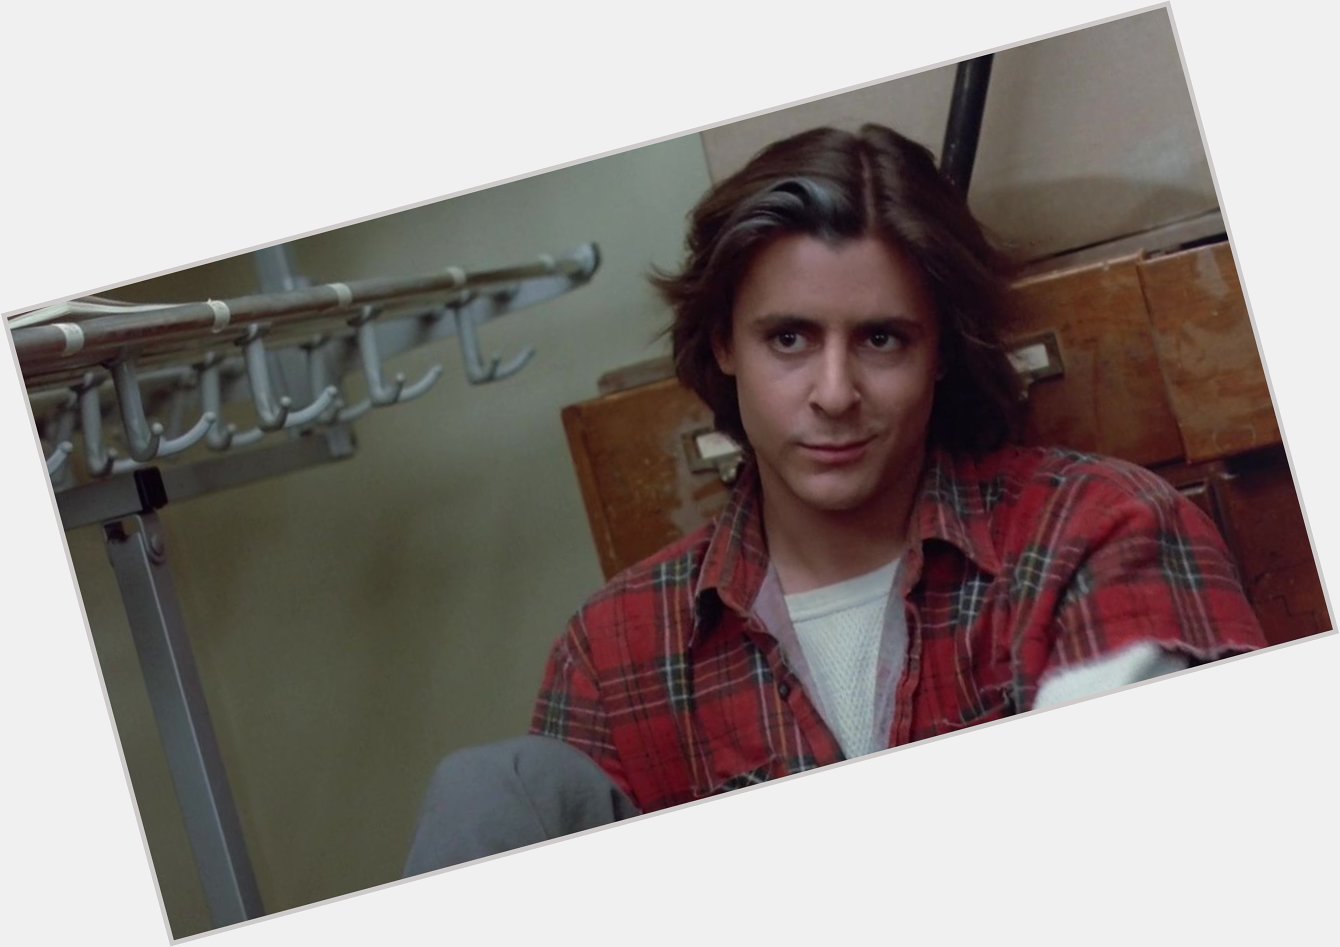 Happy birthday to Judd Nelson. Photo from The Breakfast Club, 1985. 